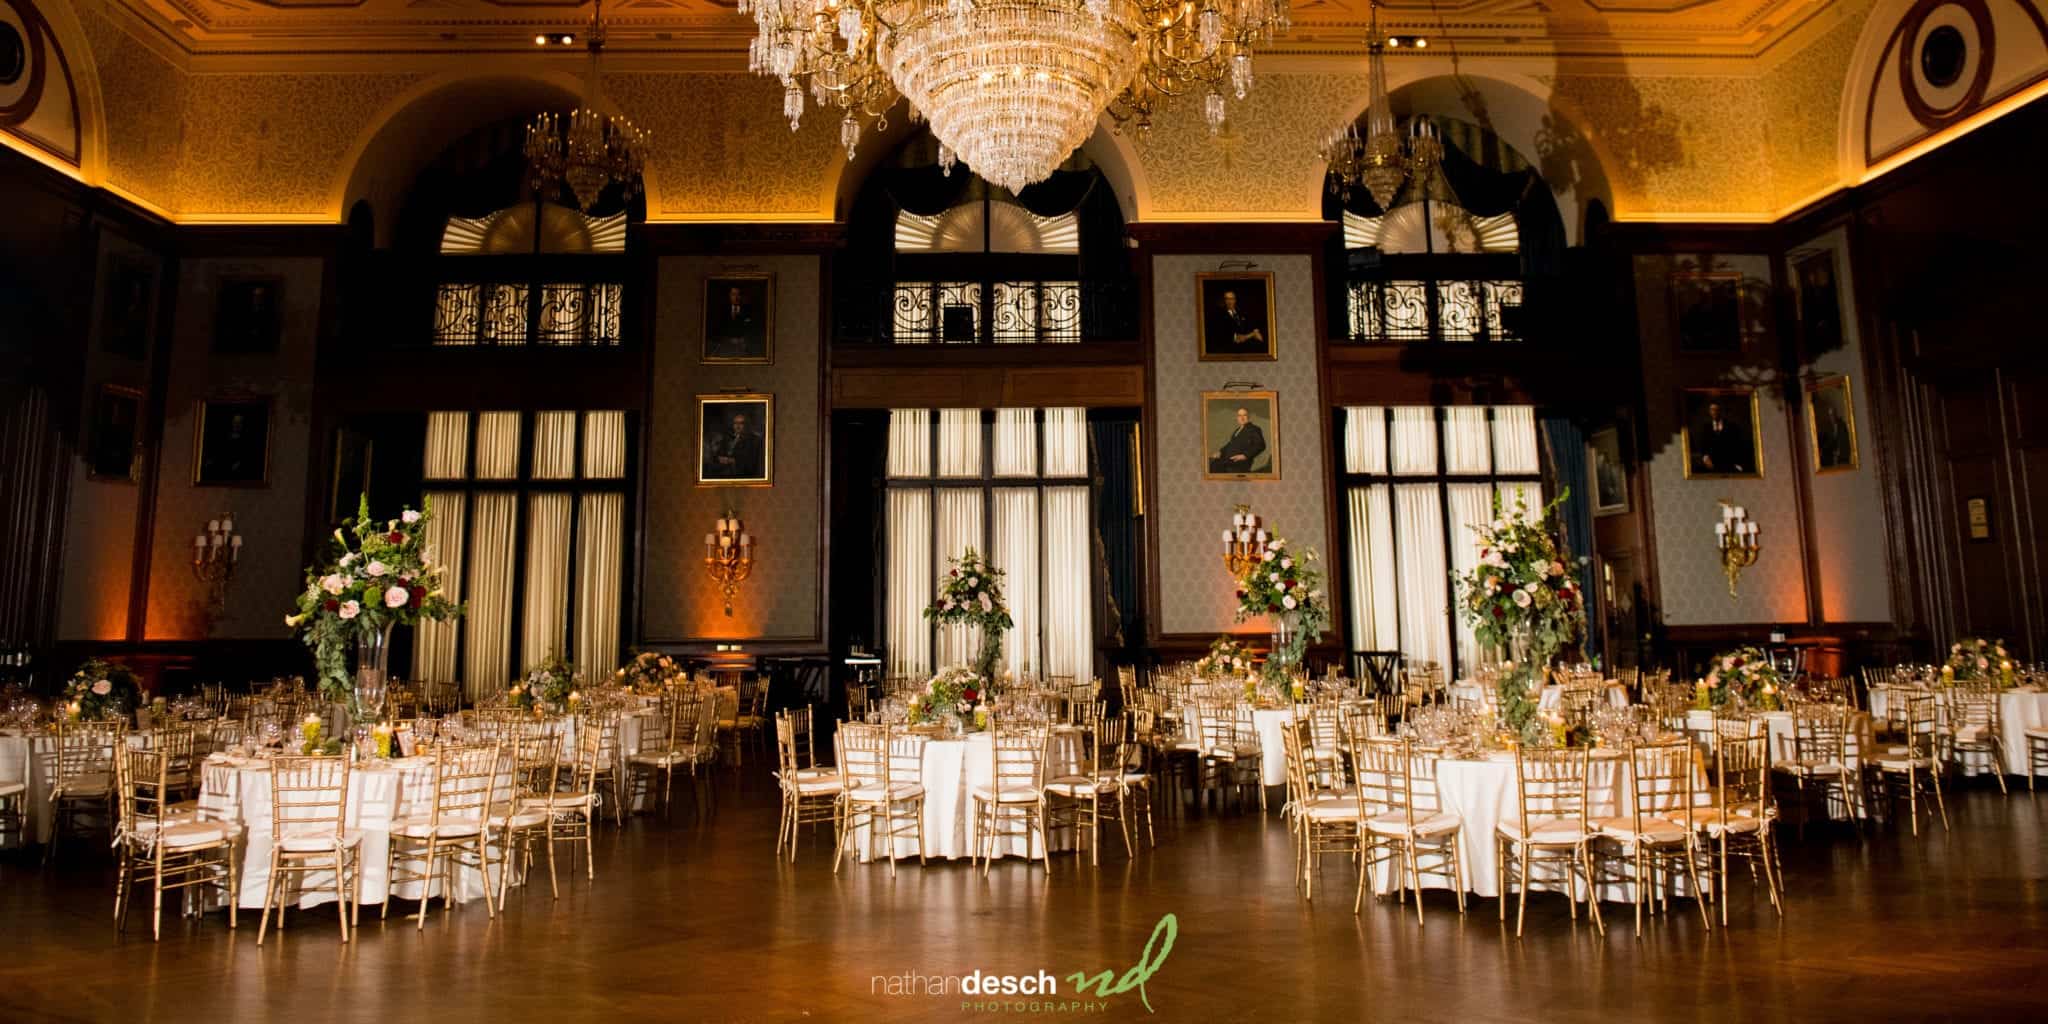 Wedding Pictures from The Union League